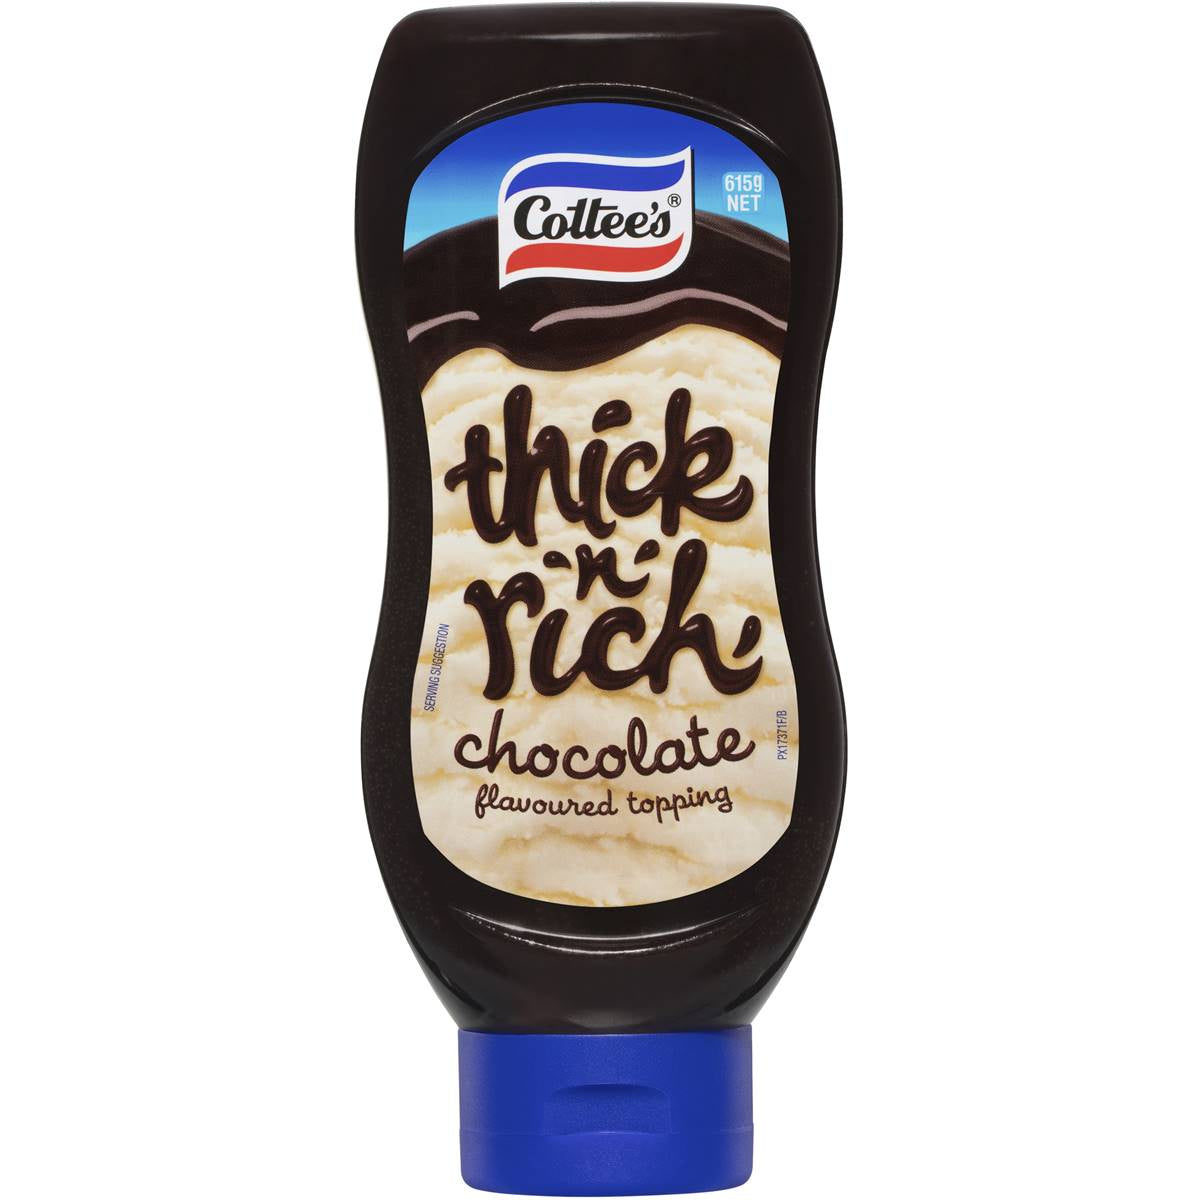 Cottees Thick n Rich Chocolate Sauce Ice Cream Topping 615g